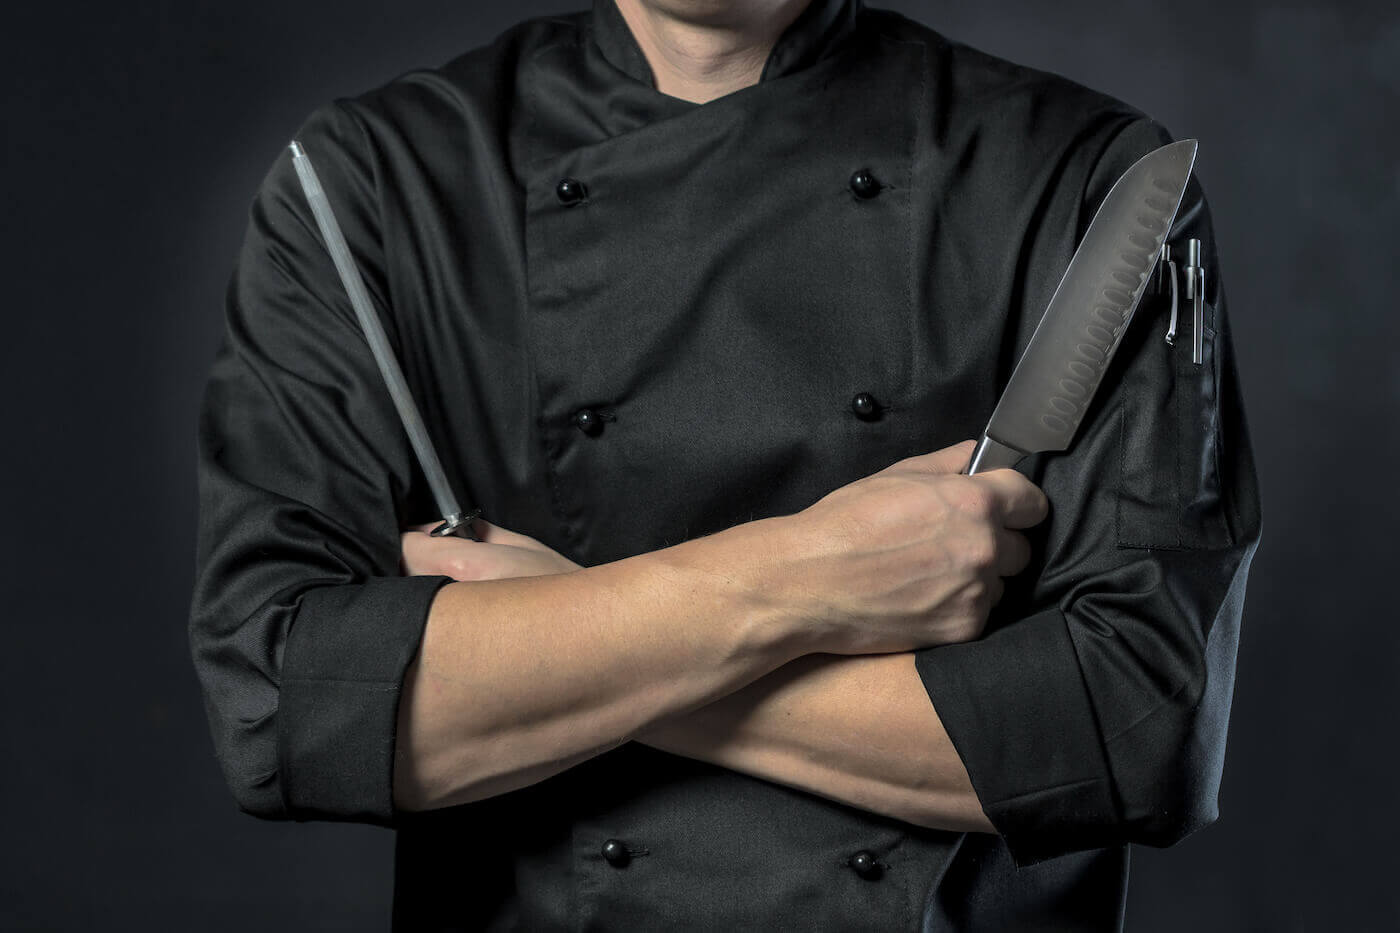 https://www.escoffier.edu/wp-content/uploads/2022/08/Chef-in-uniform-holding-two-knives-with-their-arms-crossed-1400.jpeg